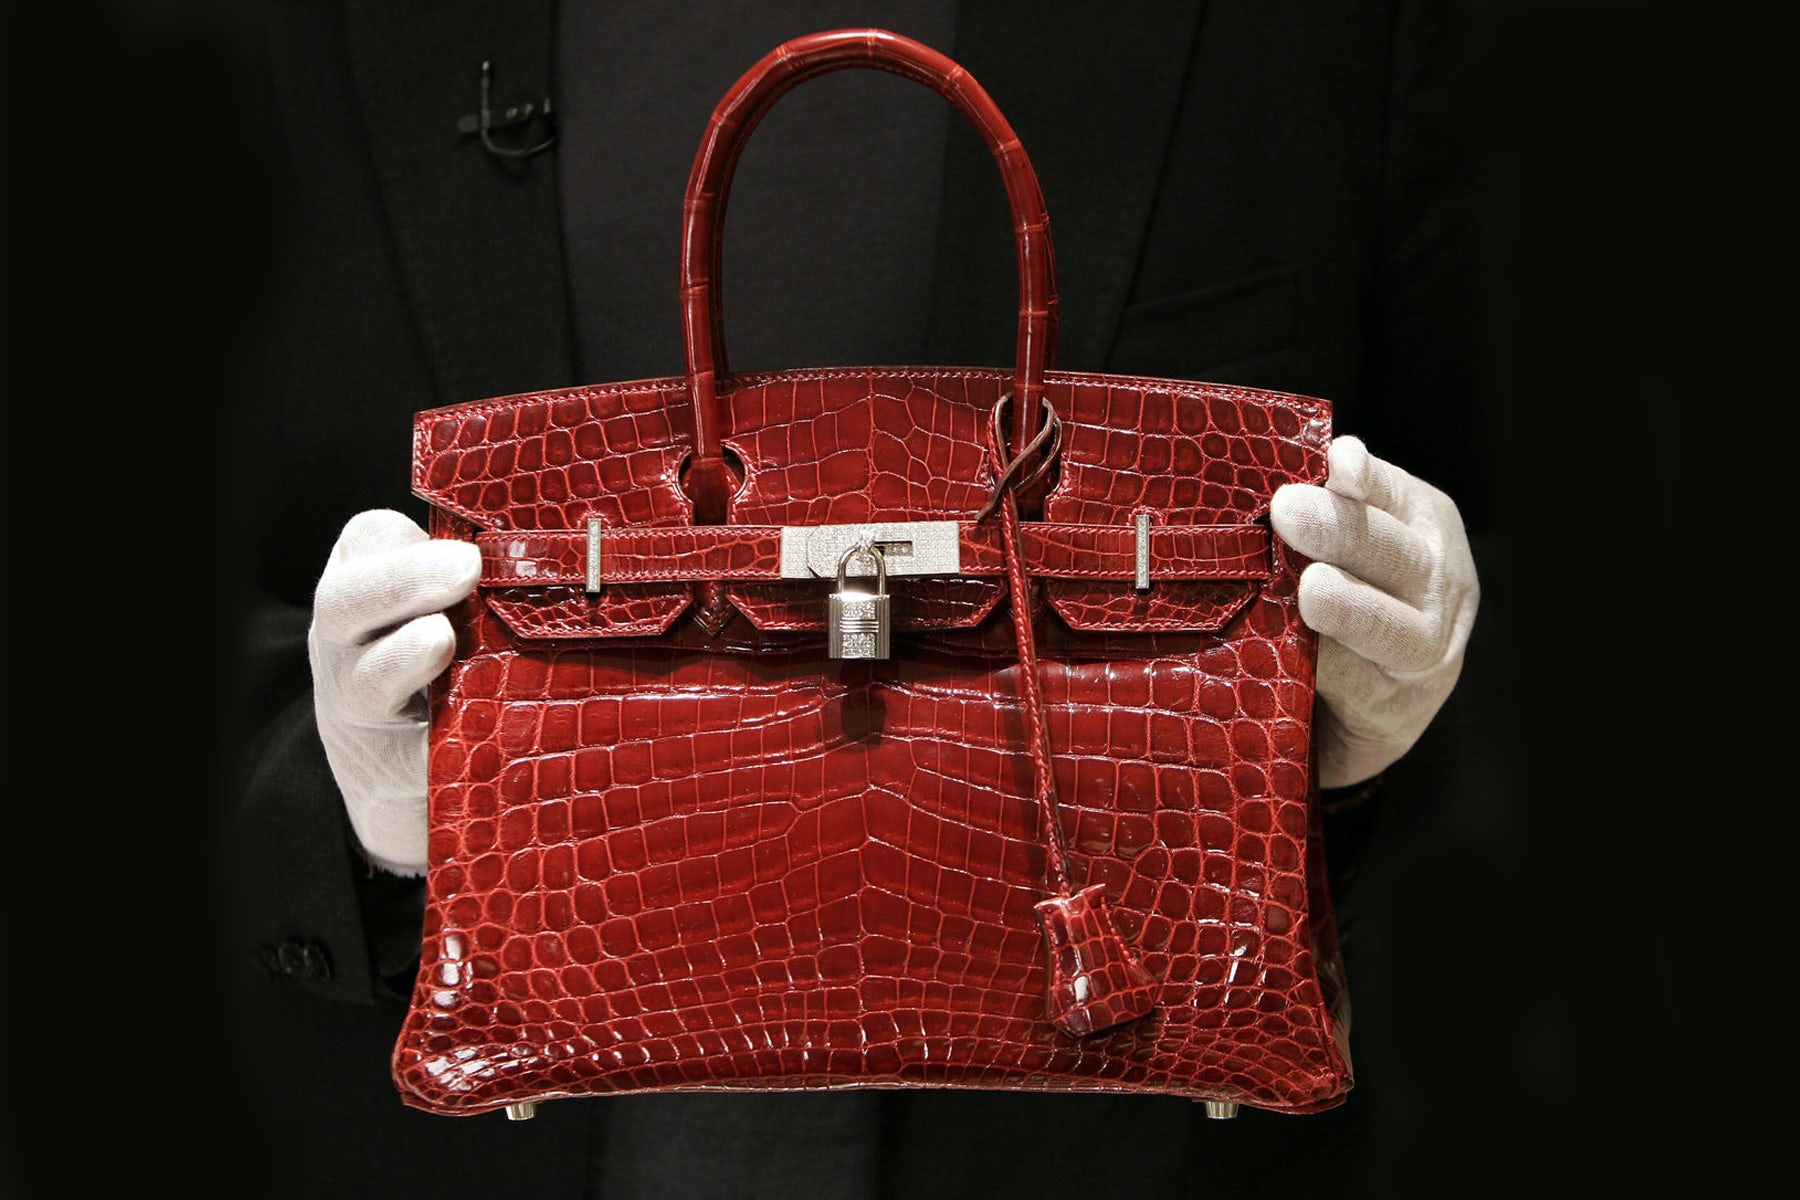 PETA Says it Will Take on LVMH Over Use of Animal Skins for Pricey  Accessories - The Fashion Law